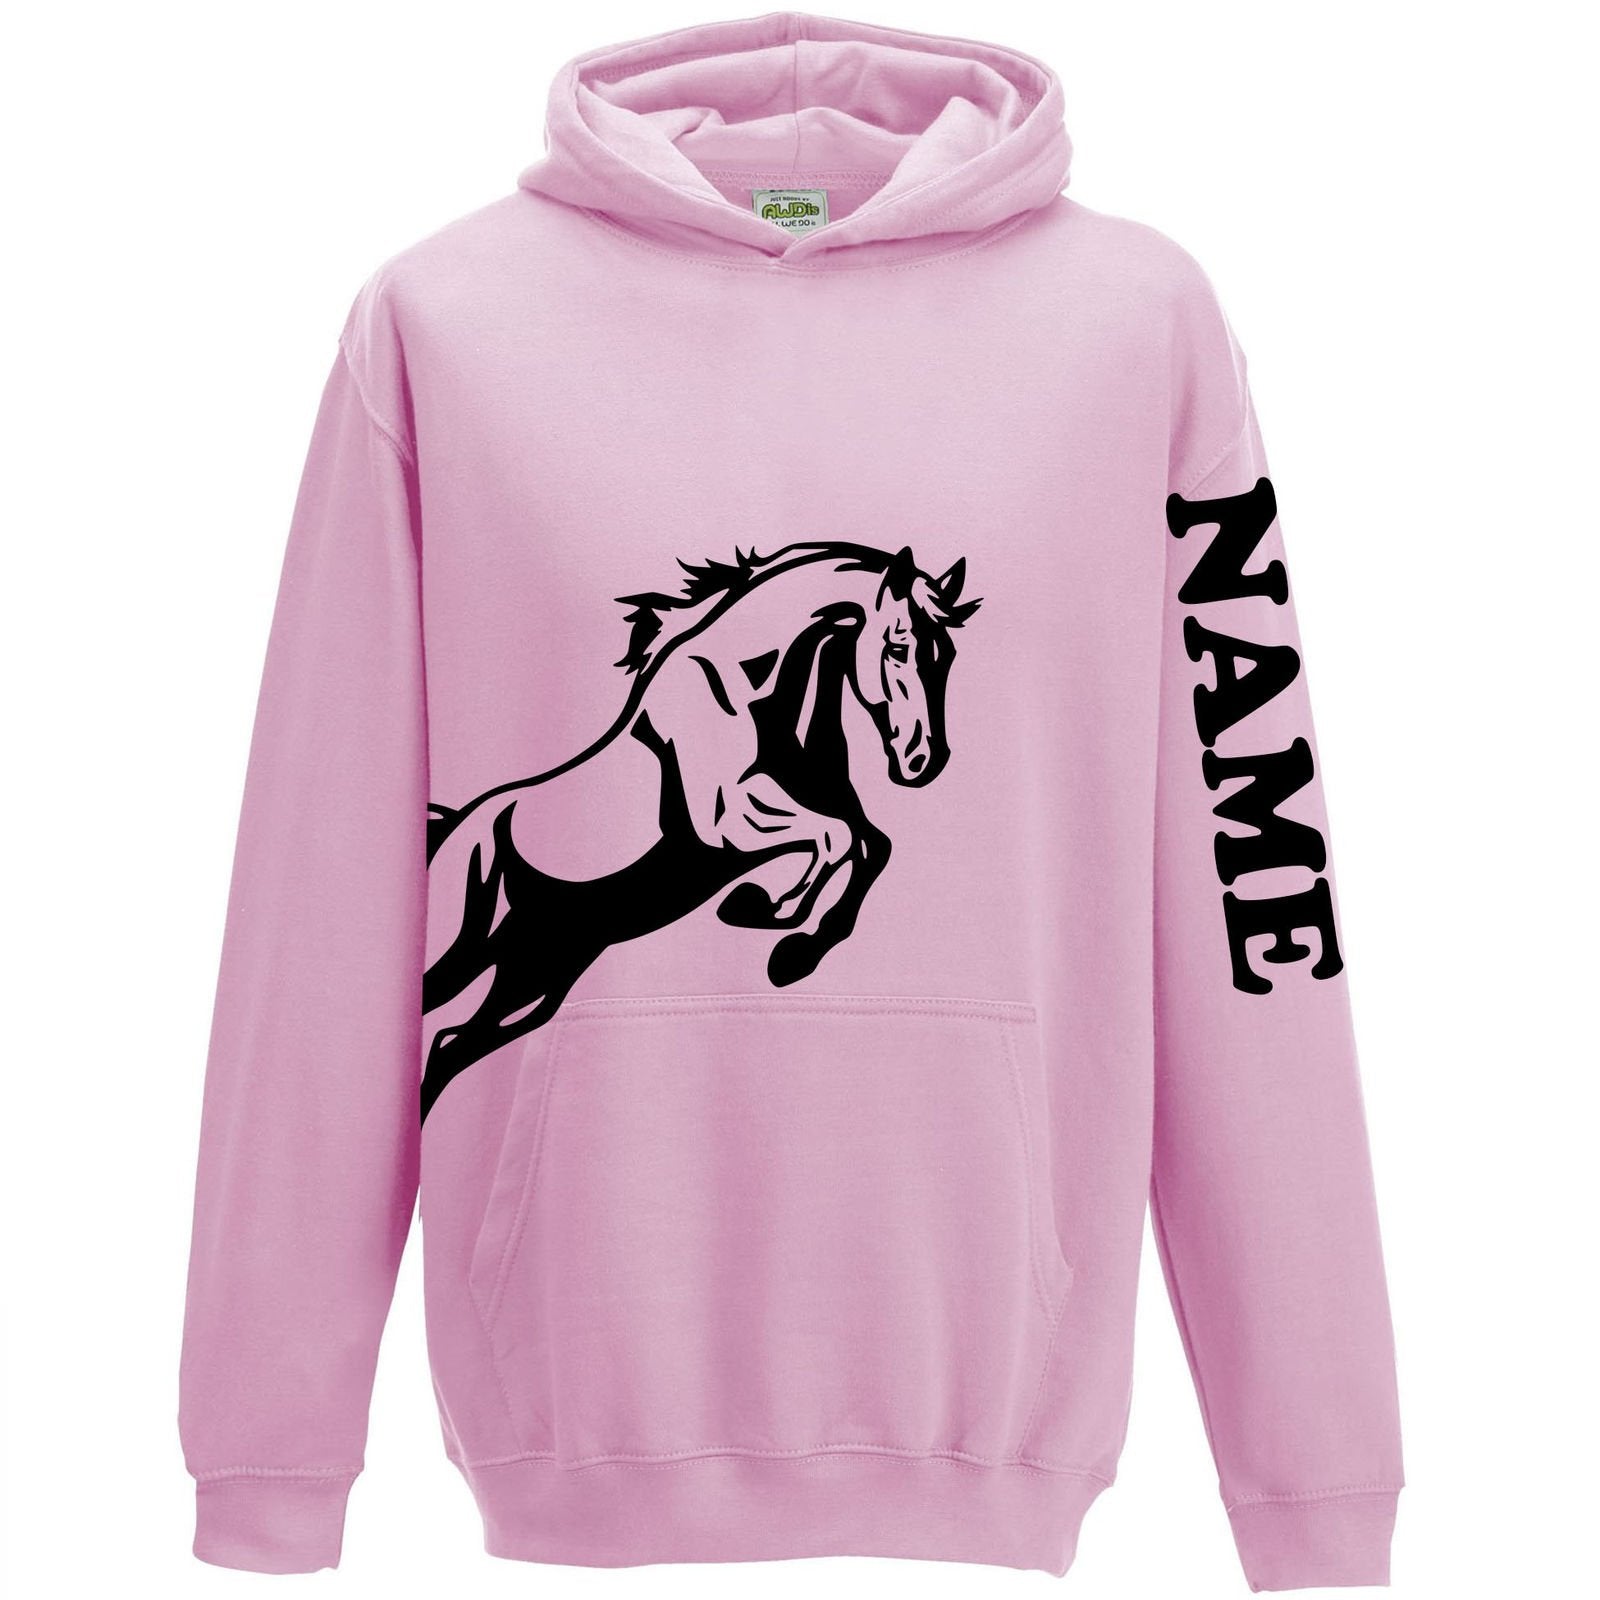 Personalised Equestrian Hooded Jumper for Girls Pink